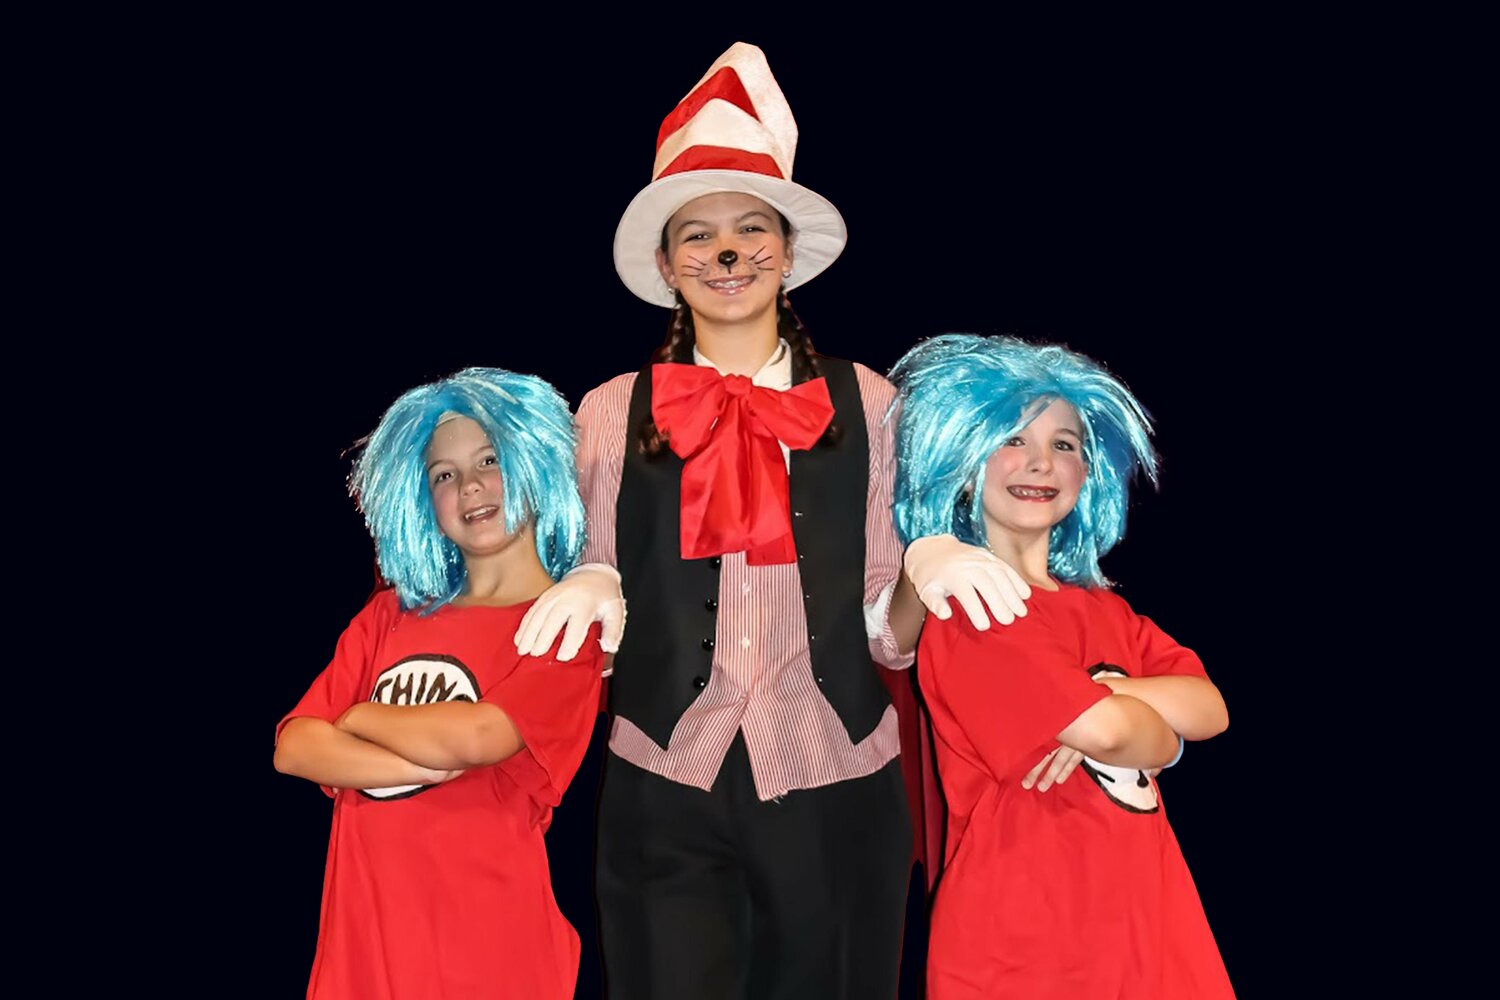 "Seusical Jr." is the result of Village Square Theatre's Junior Arts Summer workshop in which kids and young adults ages 5-21 participate in the theater arts.